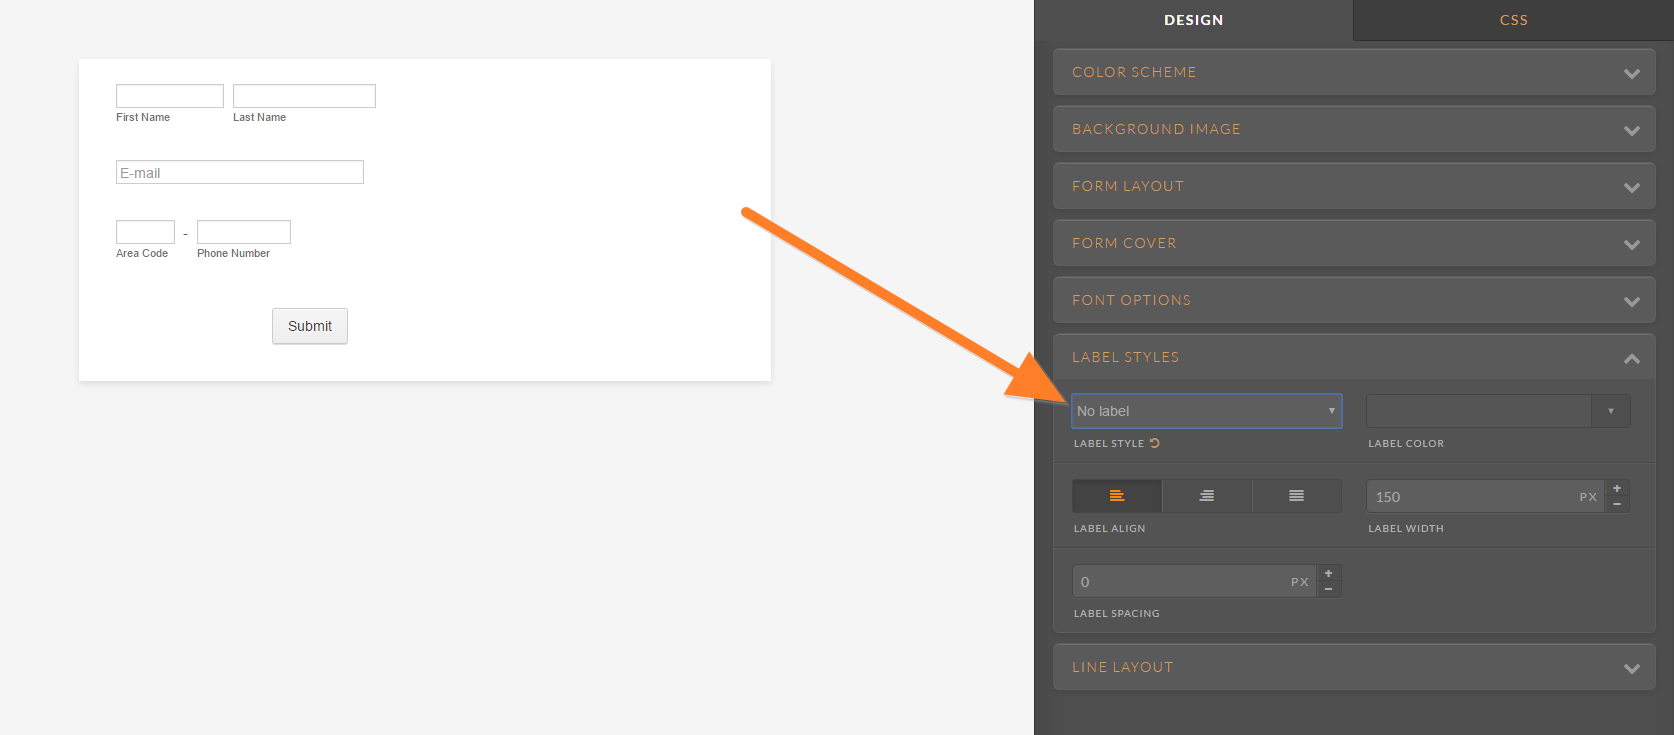 Form fields not visible in MailChimp integration Image 1 Screenshot 30